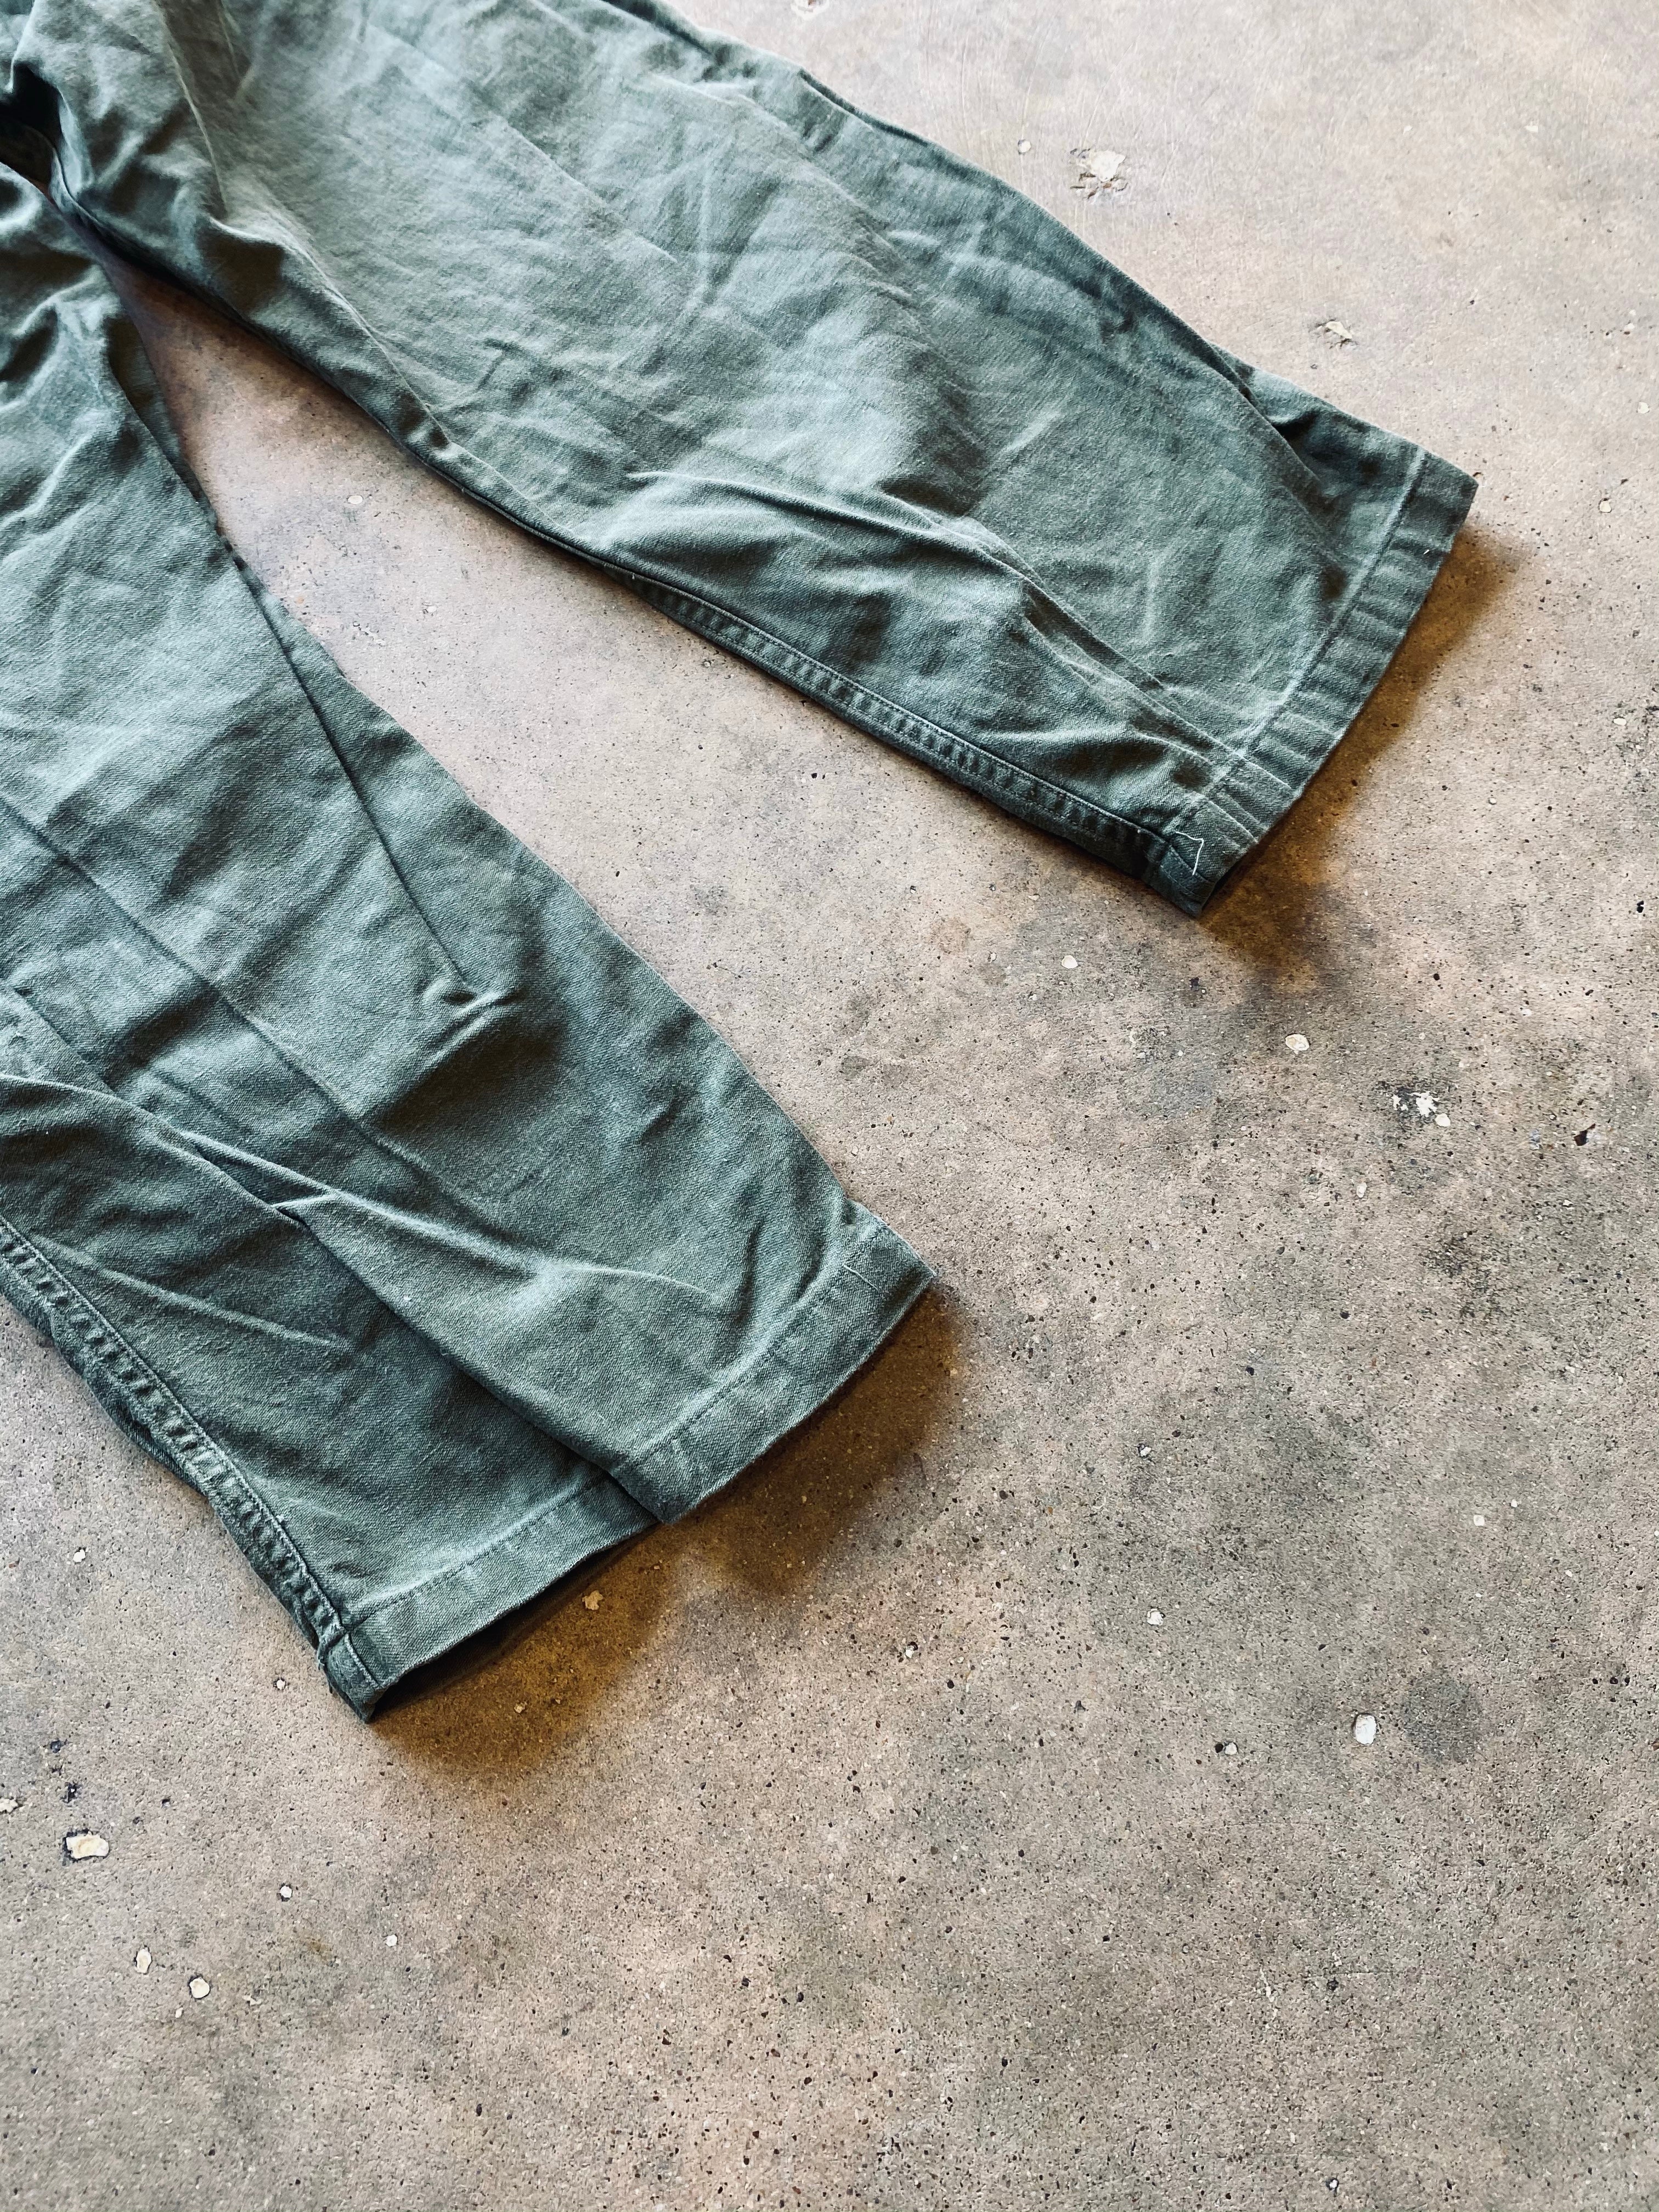 1960s US Army Type-1 Sateen Trouser